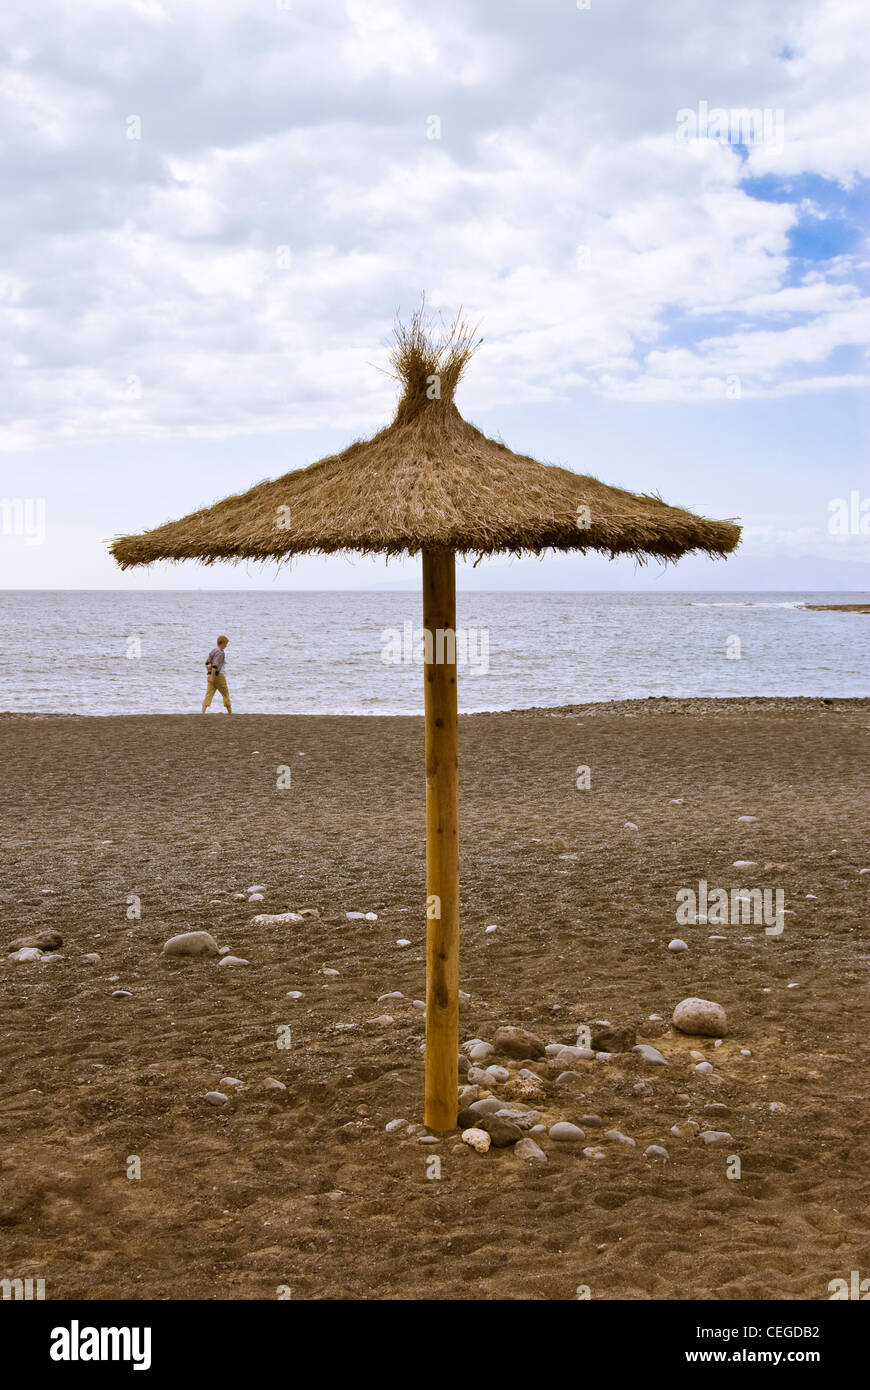 Deserted beach parasol with a lone person walking on the sand. Stock Photo